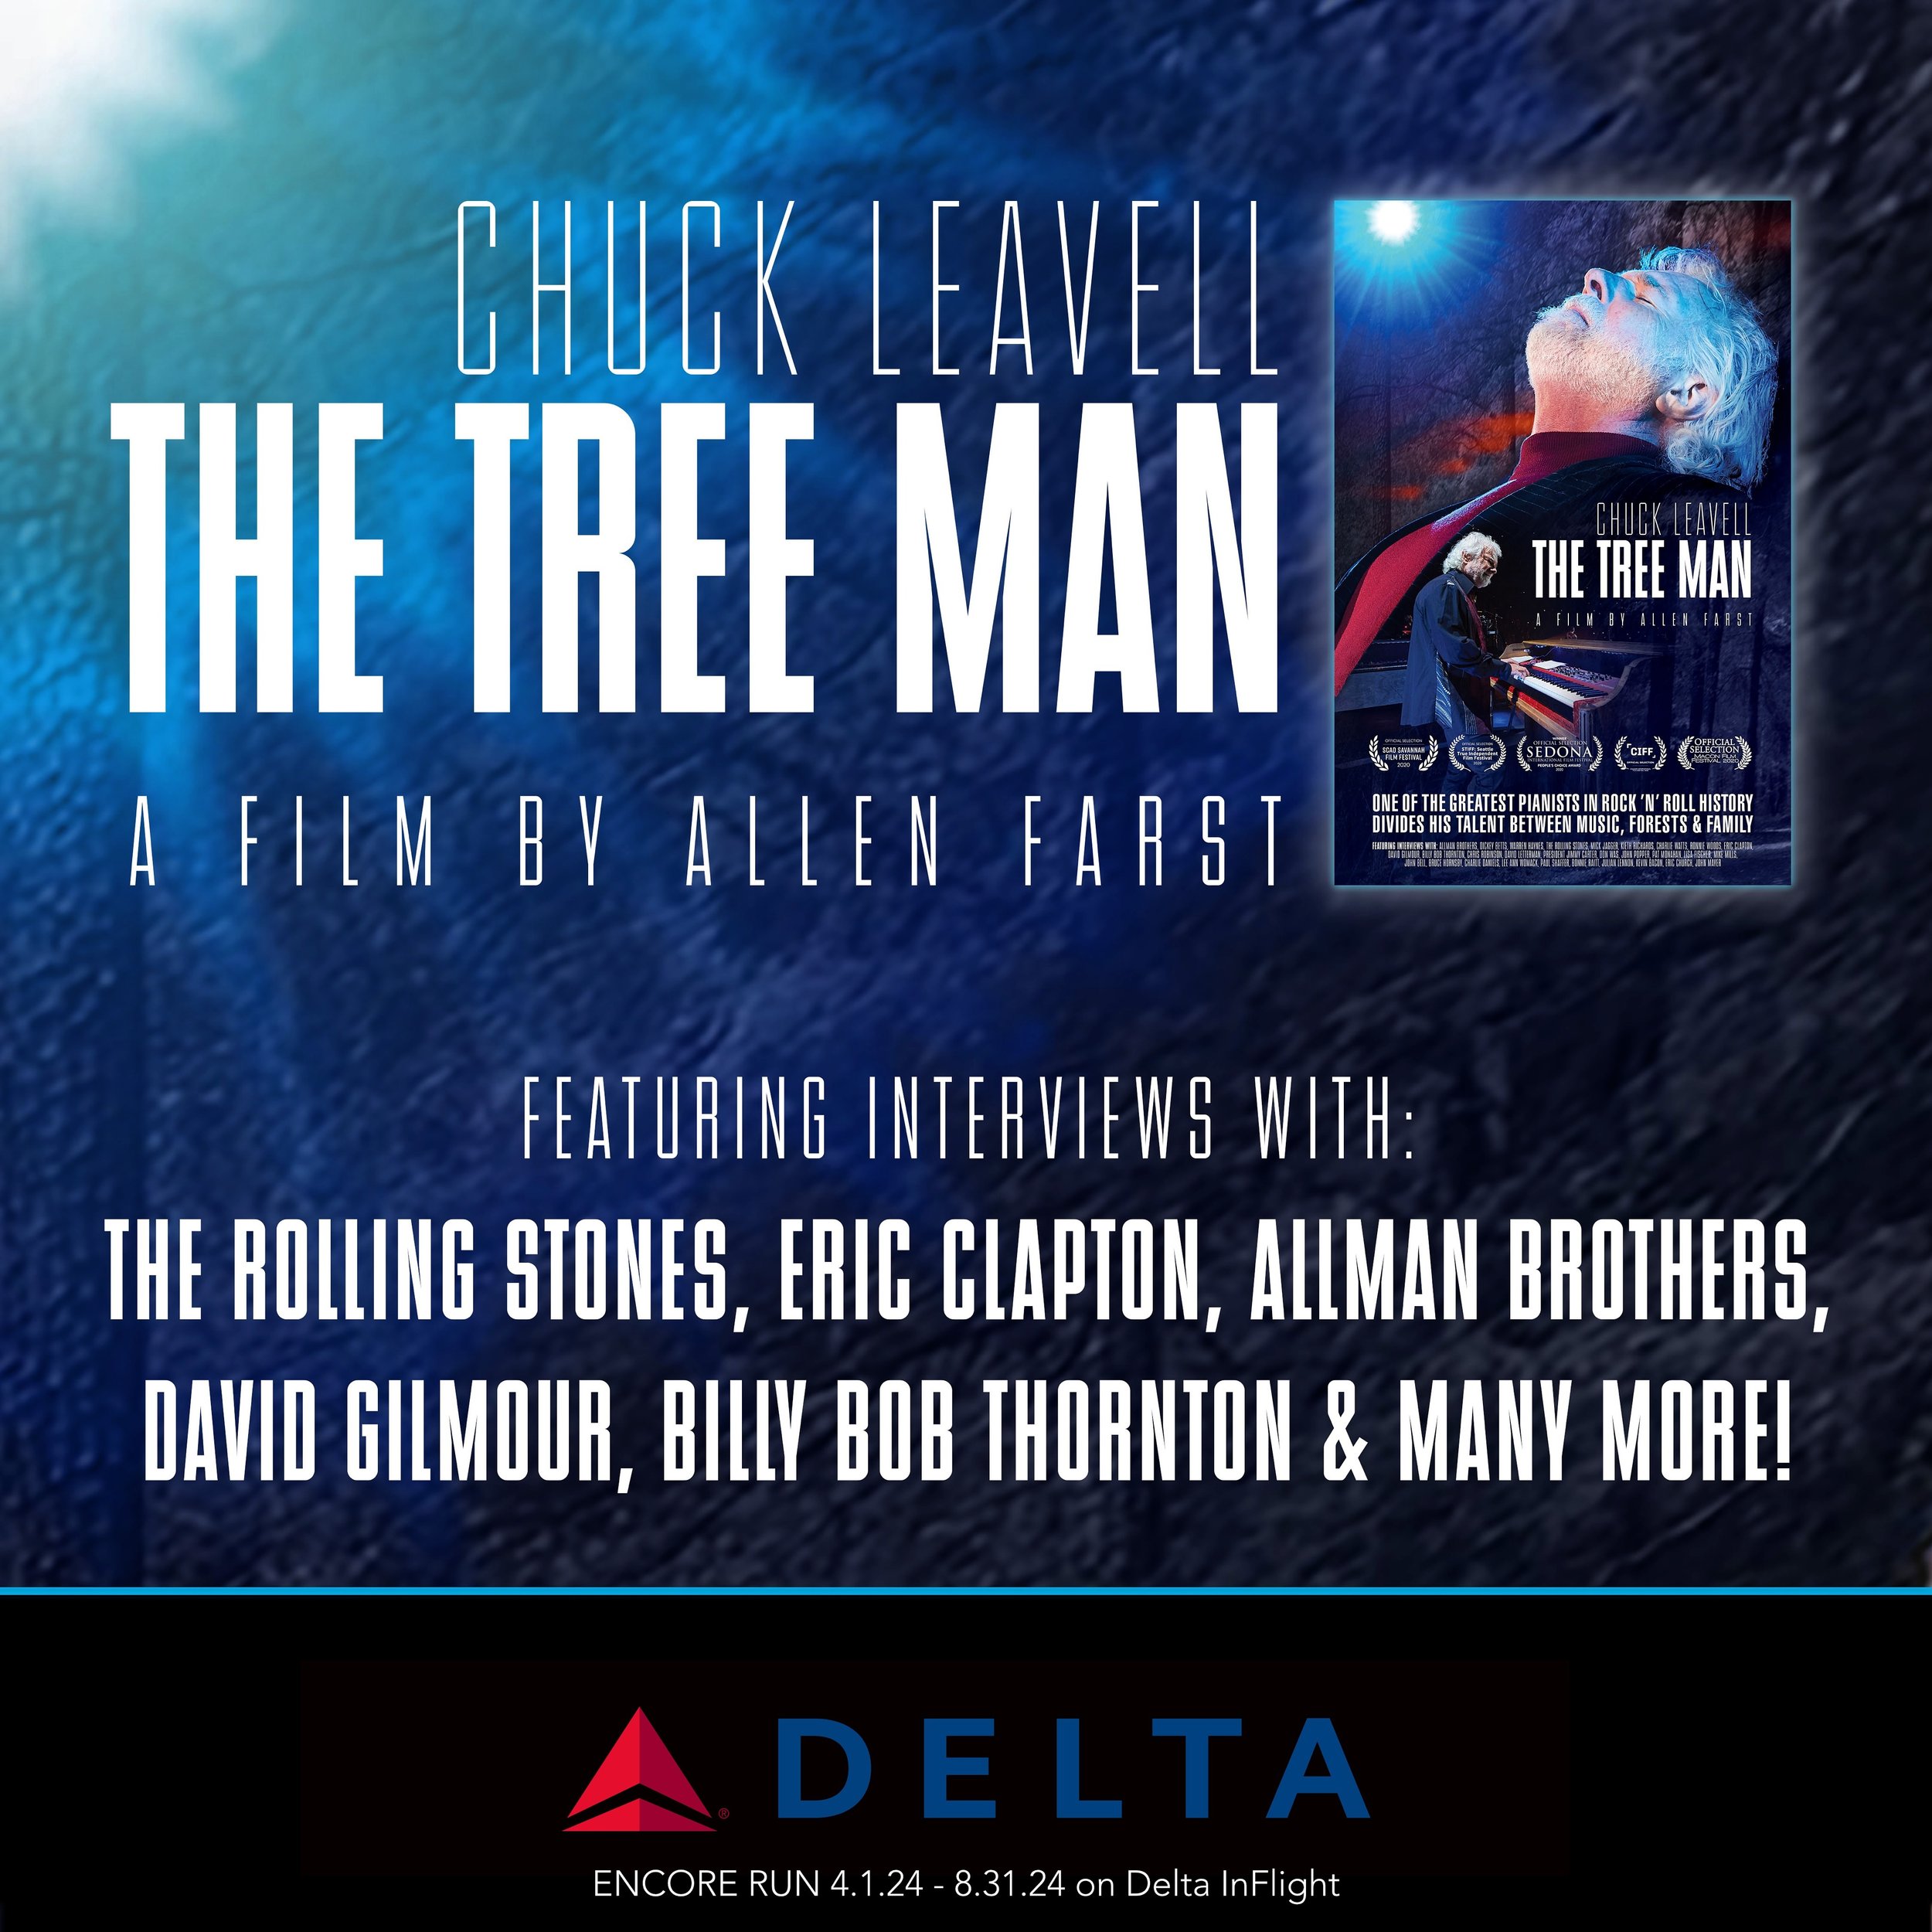 I&rsquo;m excited to let everyone know that @thetreemanmovie is now doing an encore run on @delta InFlight ✈️ - April 1 through August 31 to coincide with @therollingstones tour! #delta #thetreeman #rollingstones #aarp #allenfarst #chuckleavell